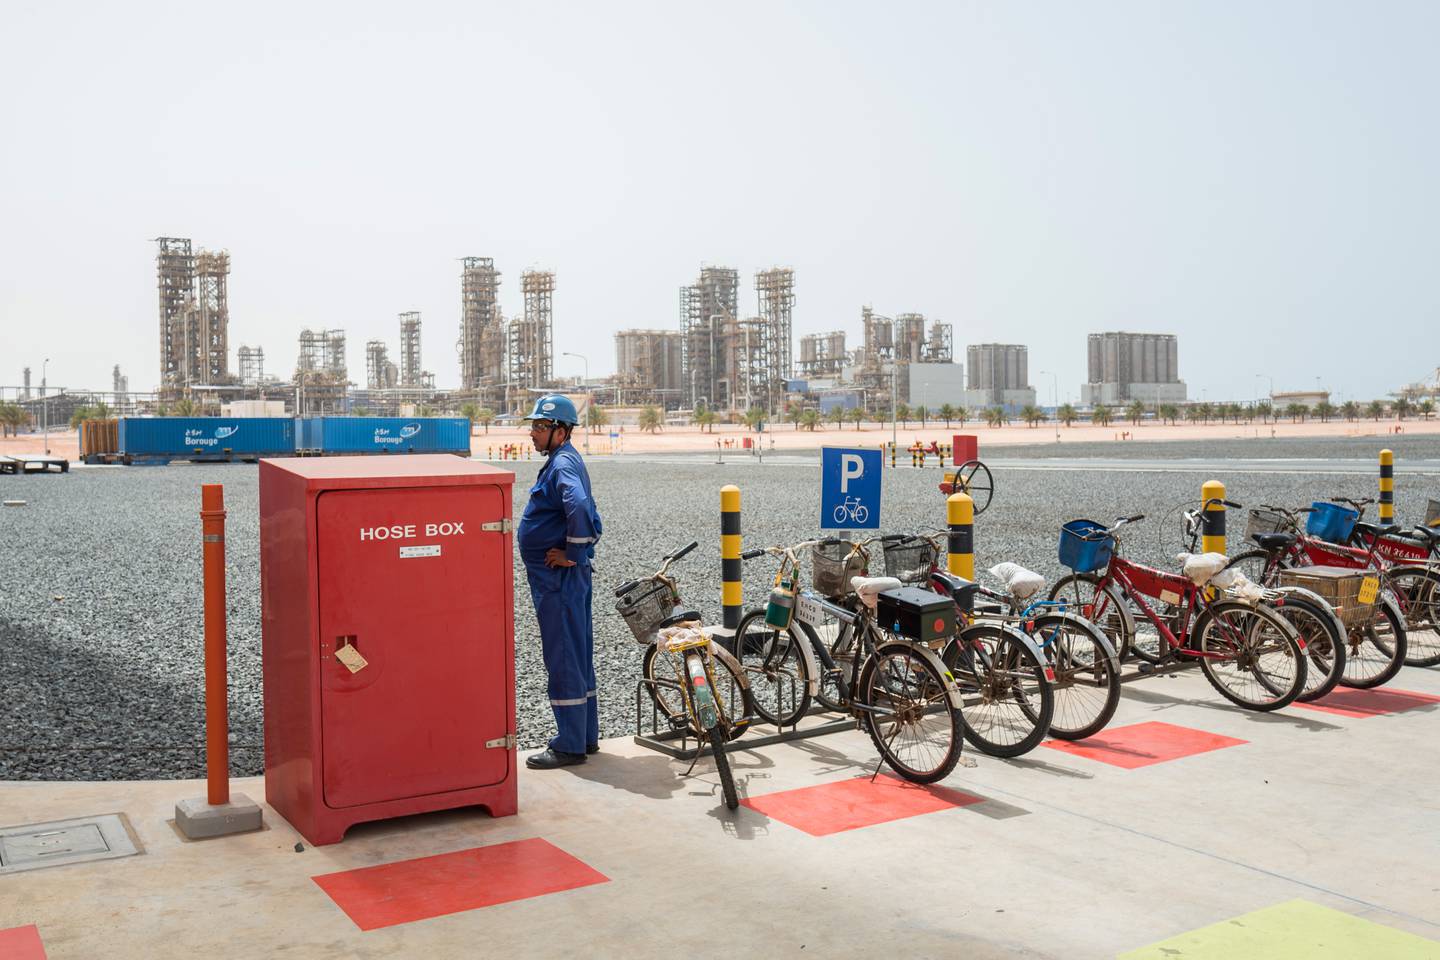 An employee stands beside a fire hose box and bicycle park at the Ruwais refinery and petrochemical complex, operated by Abu Dhabi National Oil Co. (ADNOC), in Al Ruwais, United Arab Emirates, on Monday, May 14, 2018. Adnoc is seeking to create world’s largest integrated refinery and petrochemical complex at Ruwais. Photographer: Christophe Viseux/Bloomberg